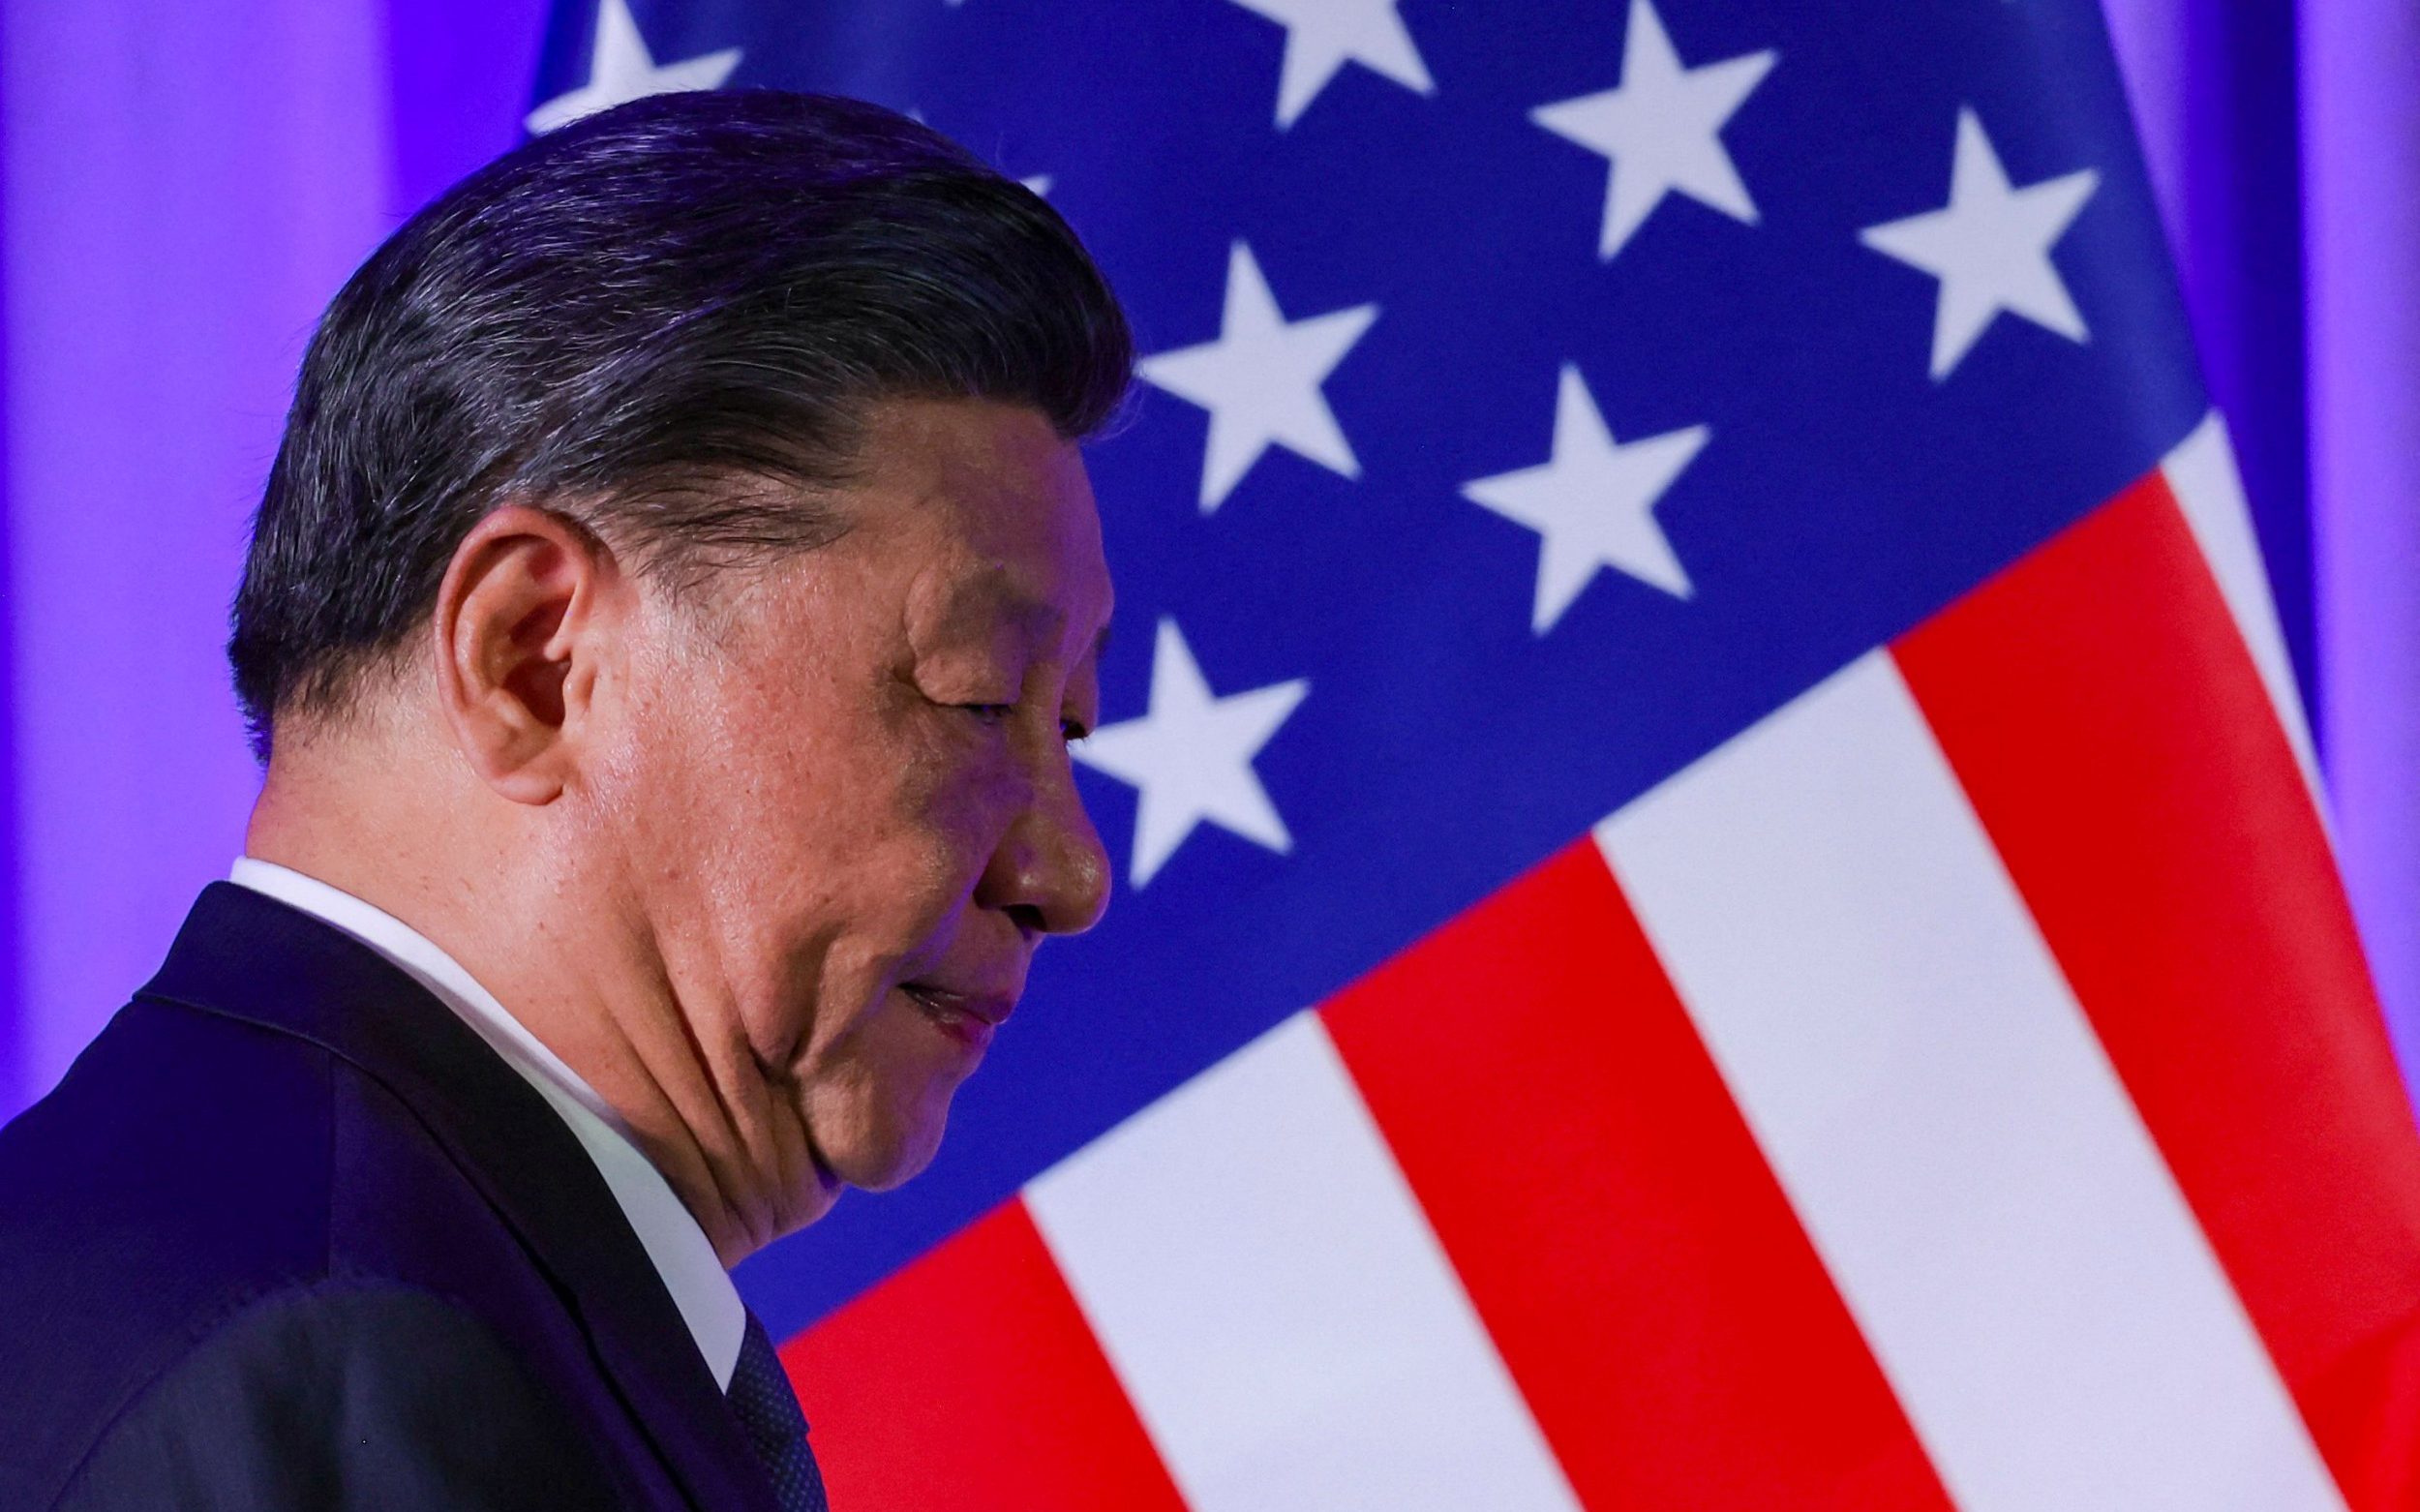 xi jinping will make the west pay for china’s economic collapse